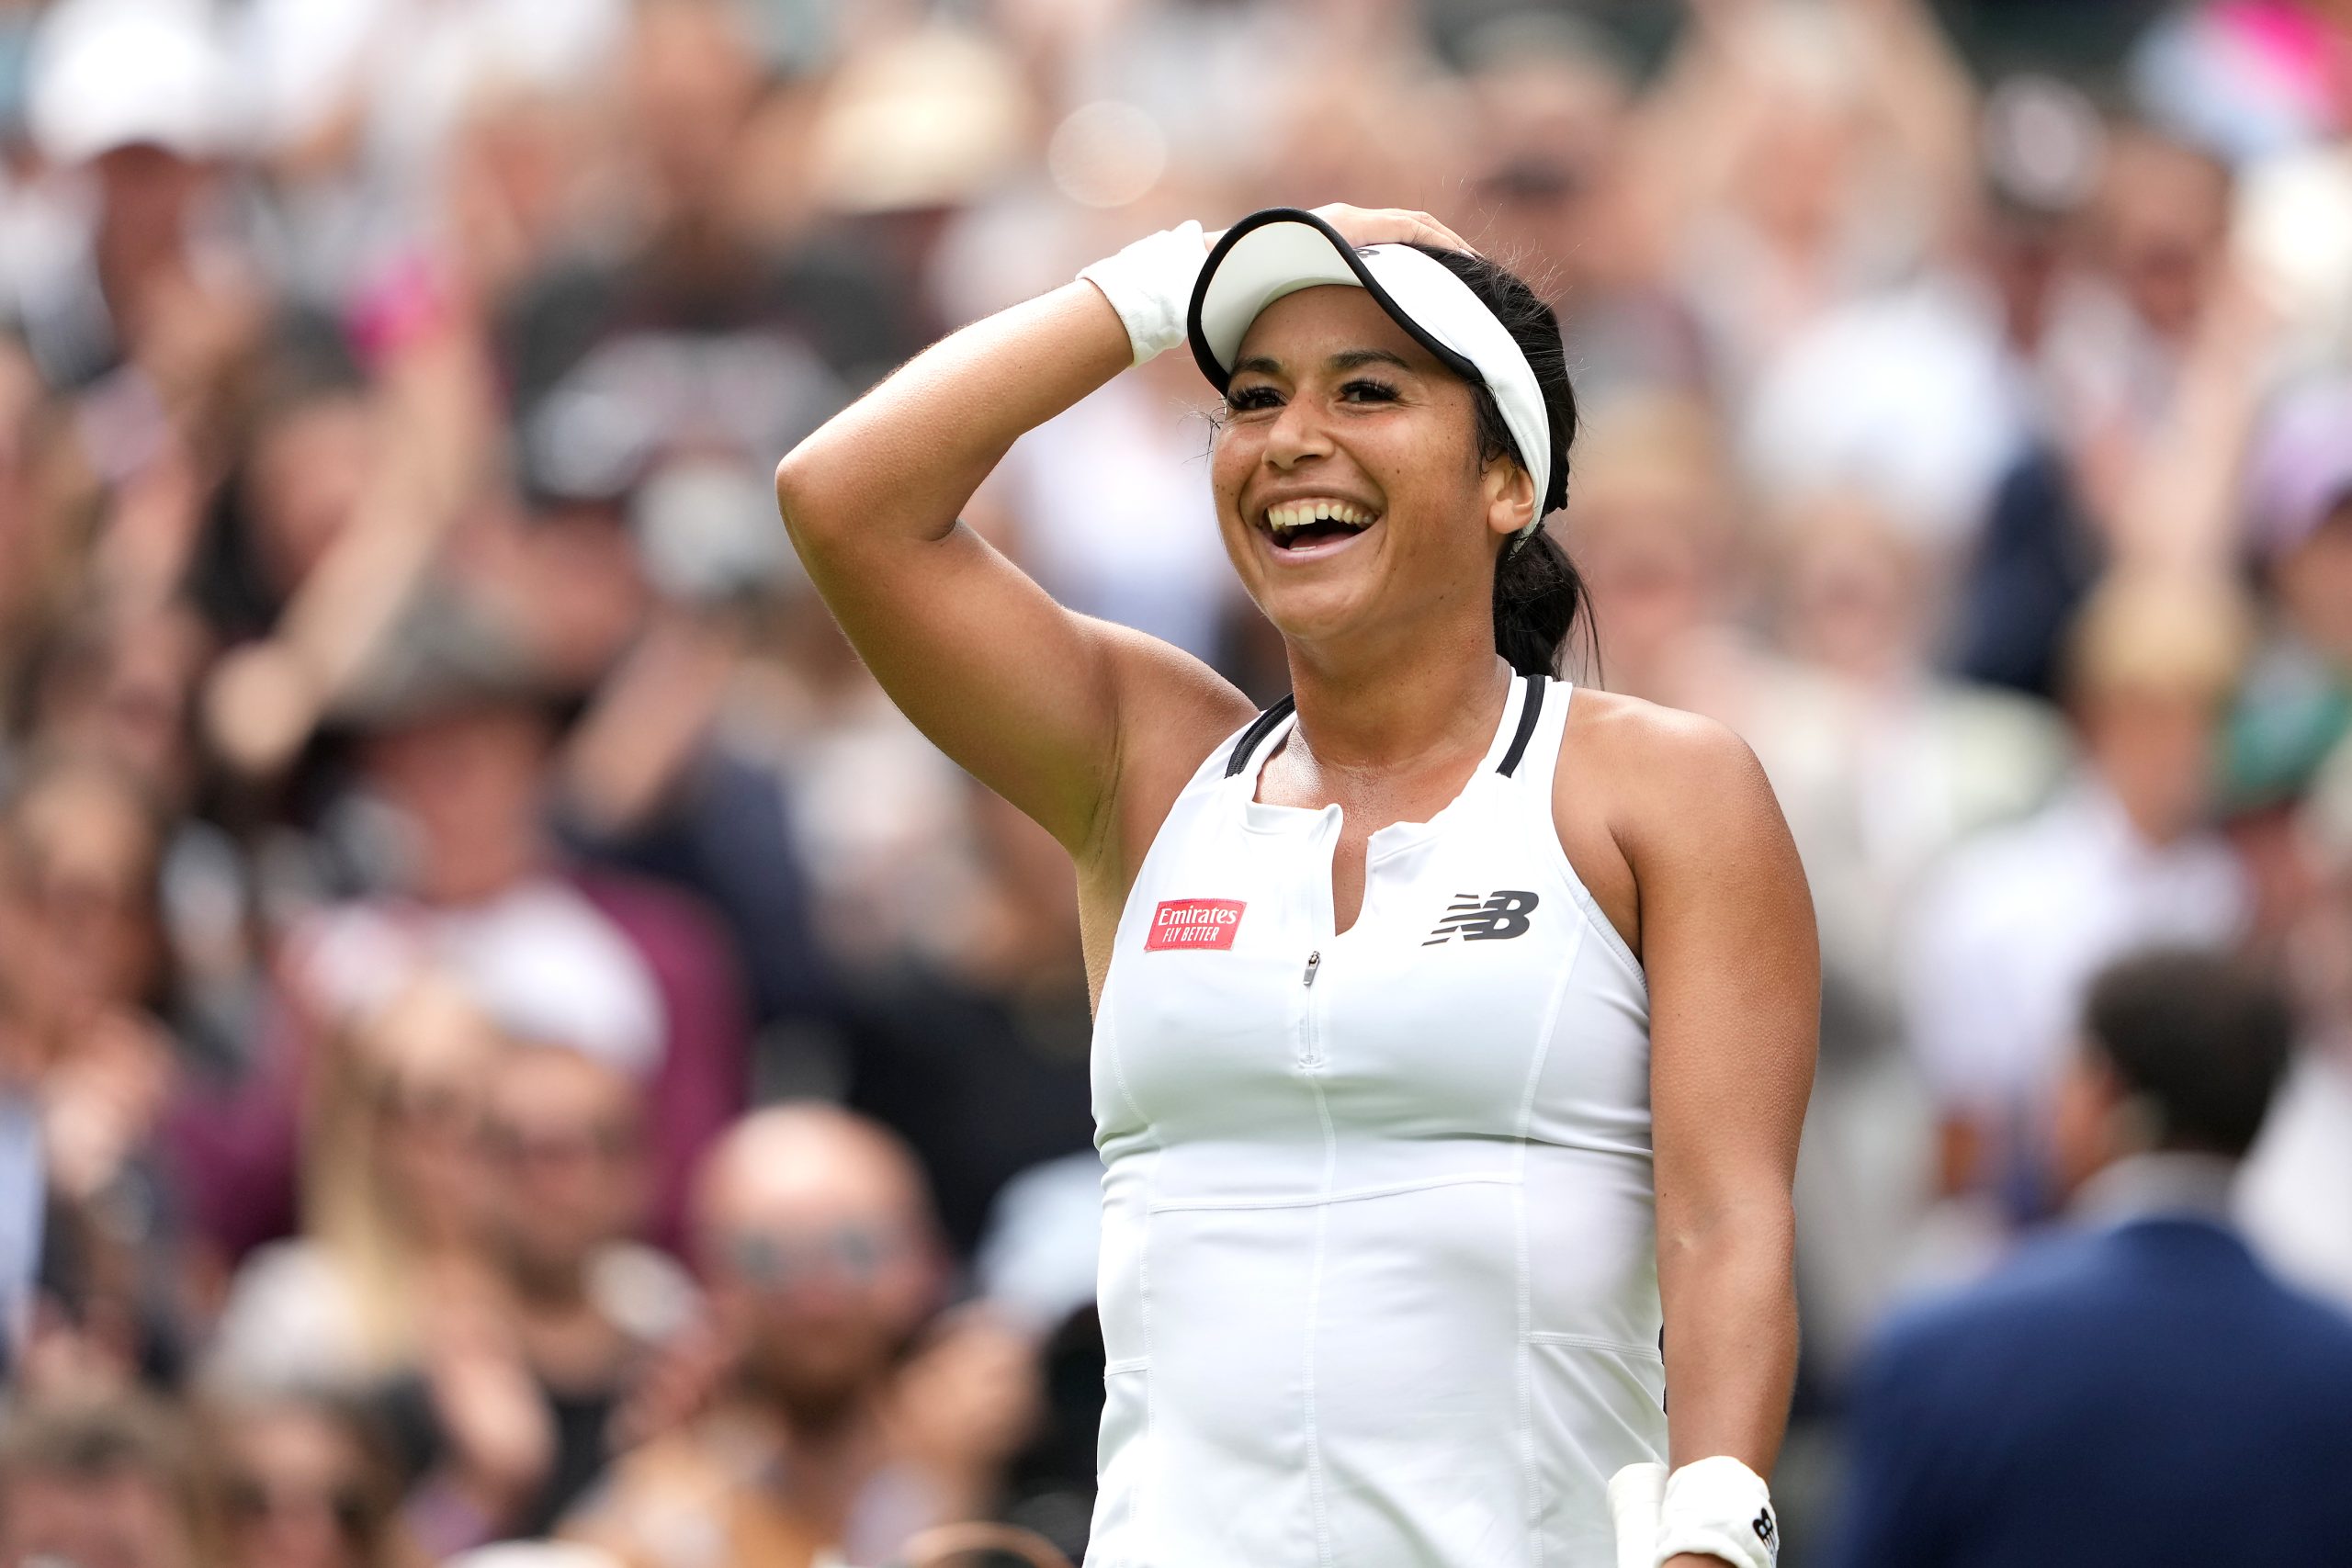 Heather Watson happy to be back at Wimbledon as she deals with theft of her car